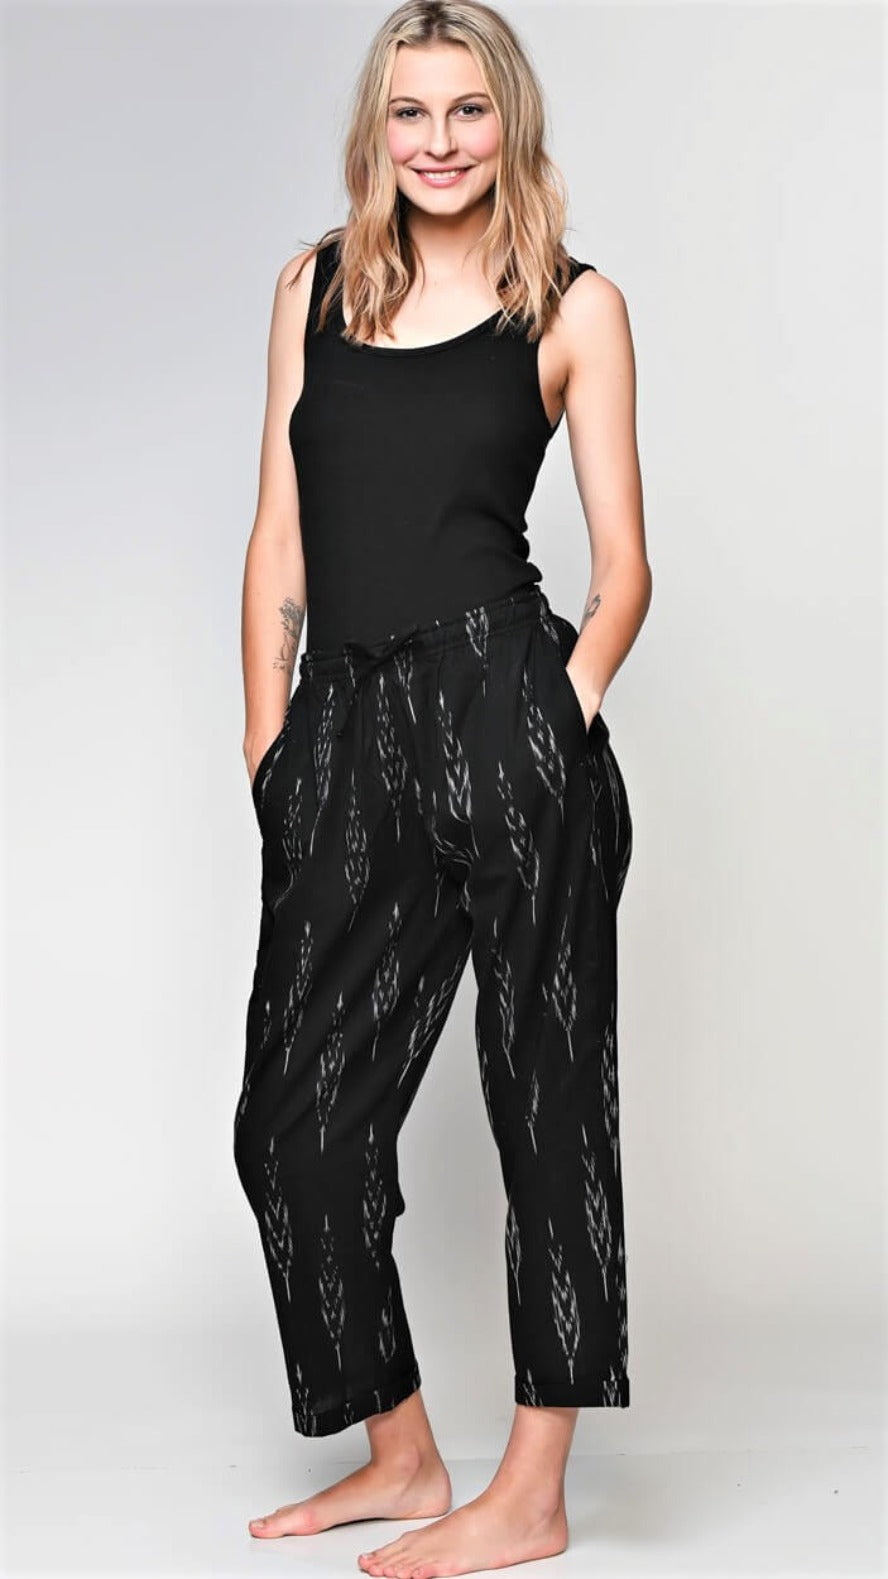 Cropped Ankle Pants with Pockets in Black and White Ikat